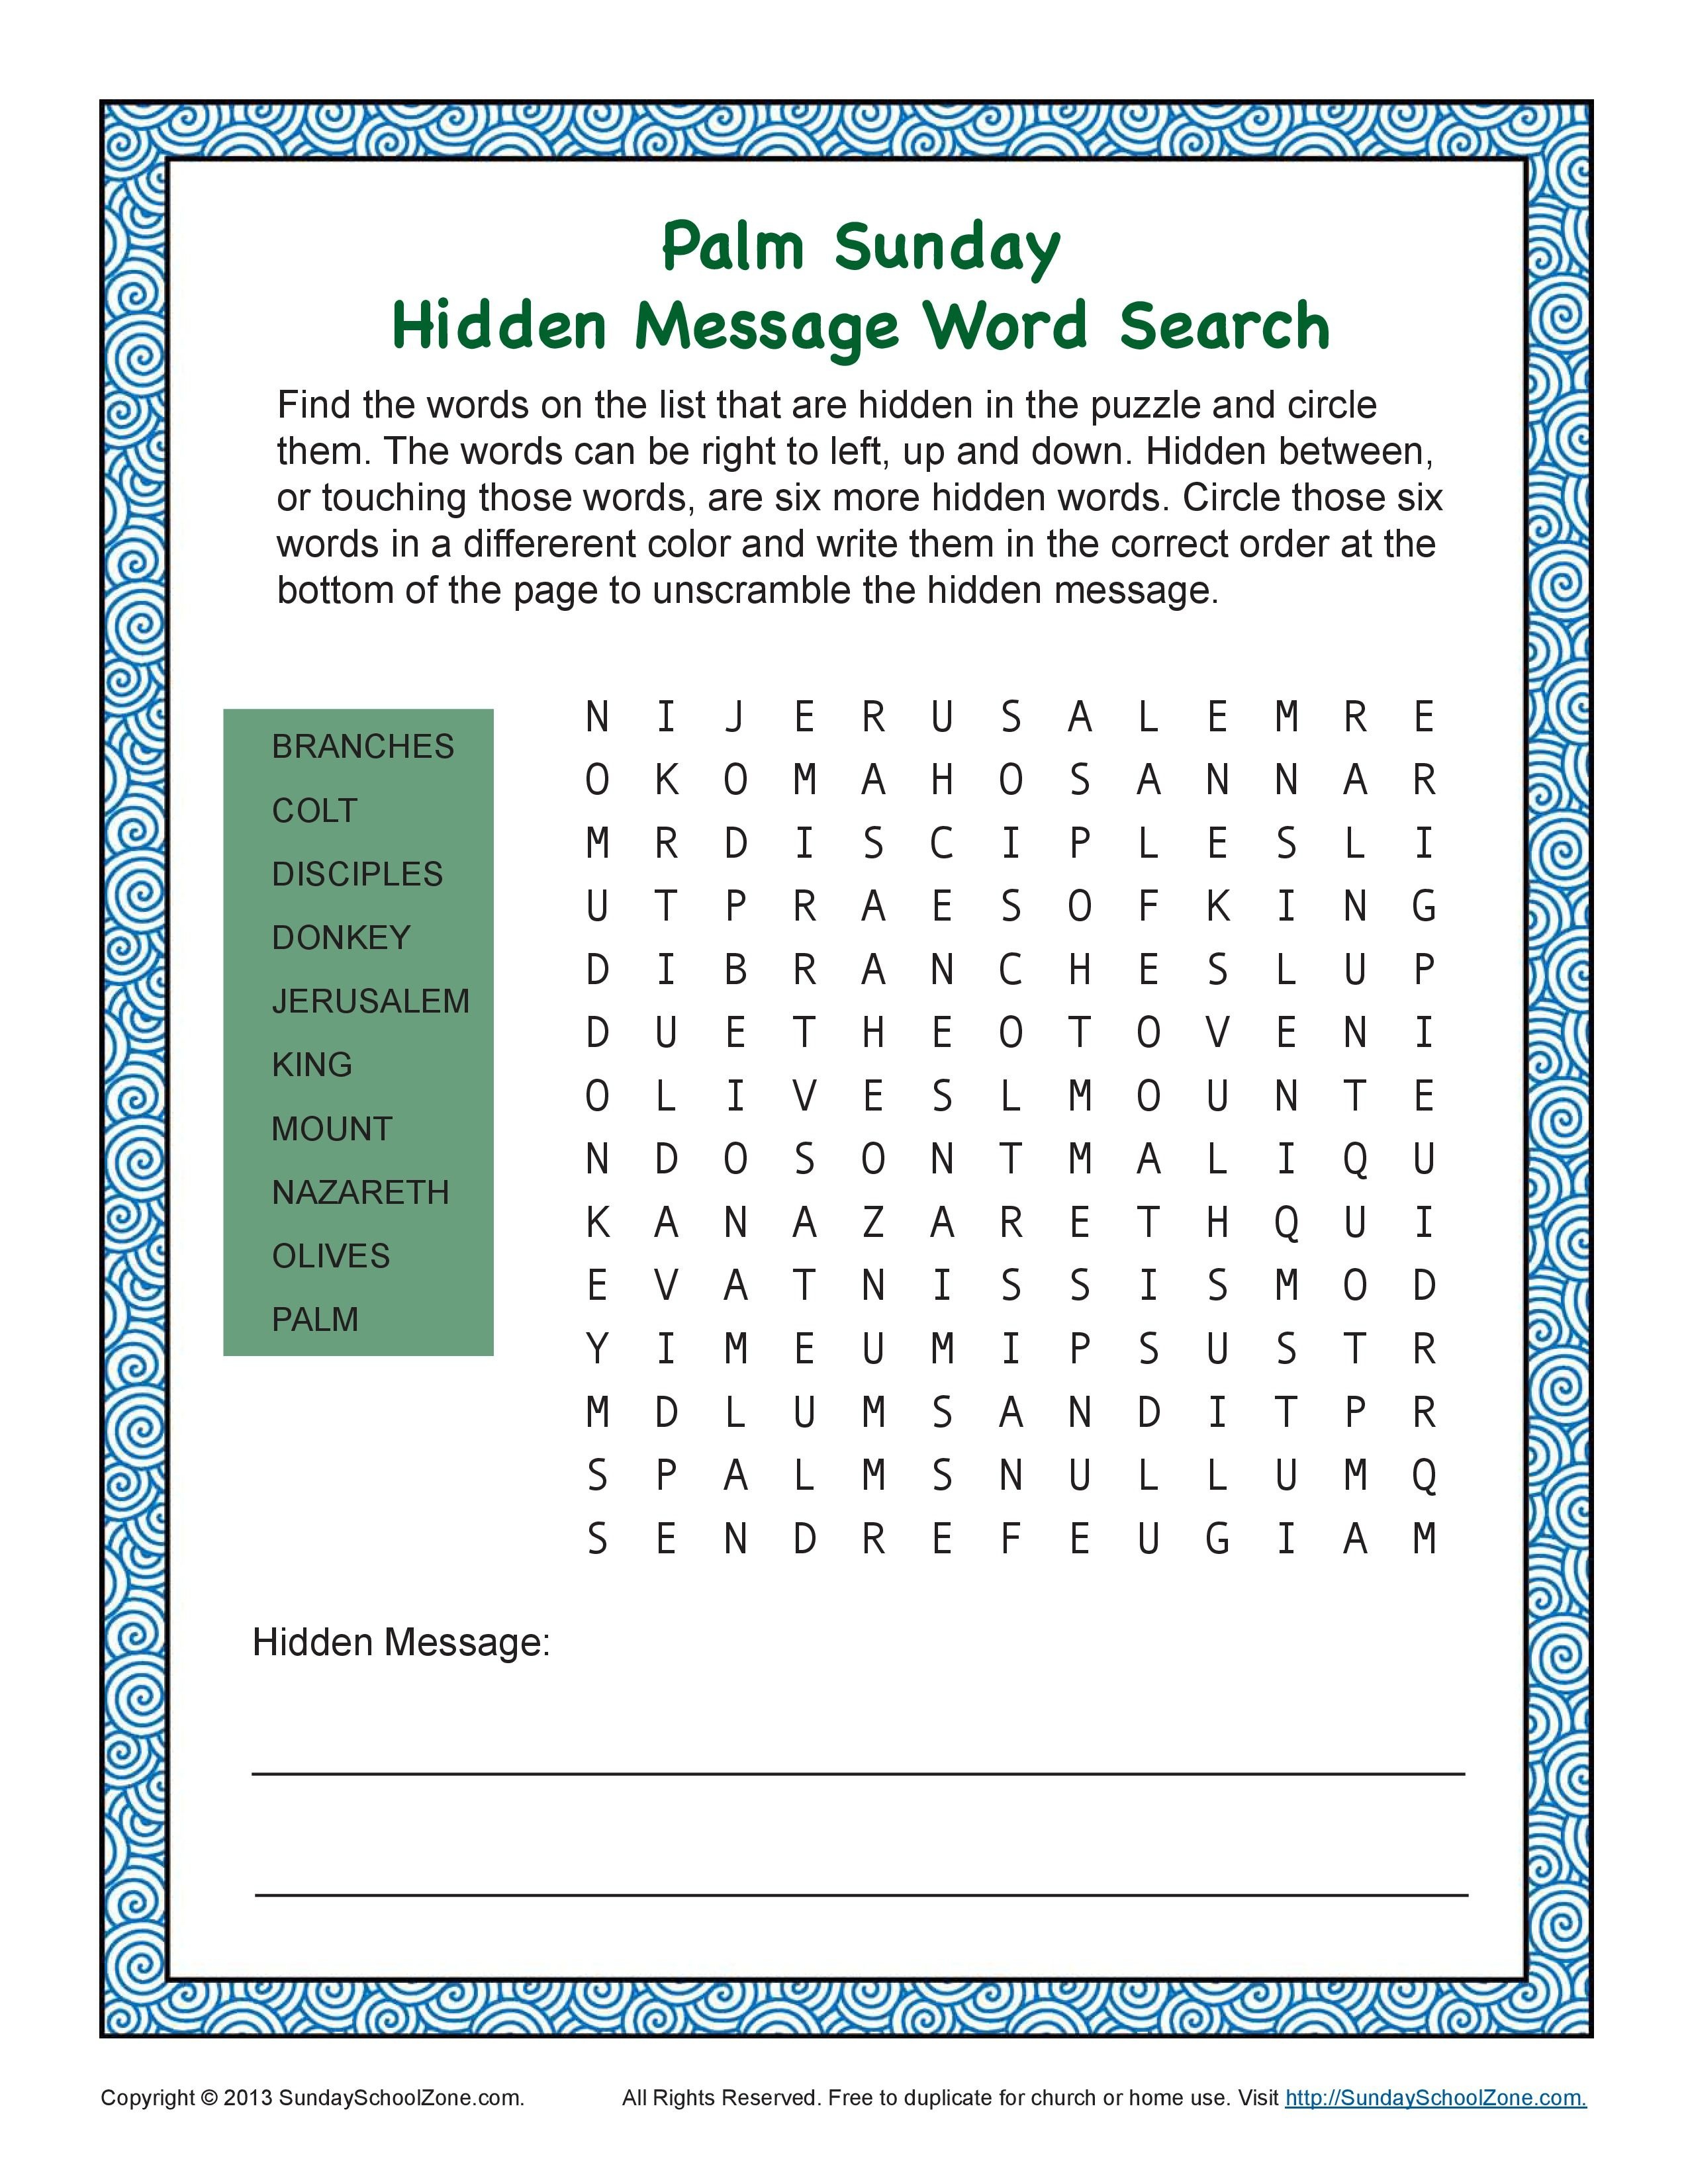 Palm Sunday Word Search Bible Activity On Sunday School Zone - Word Search Maker Online Free Printable